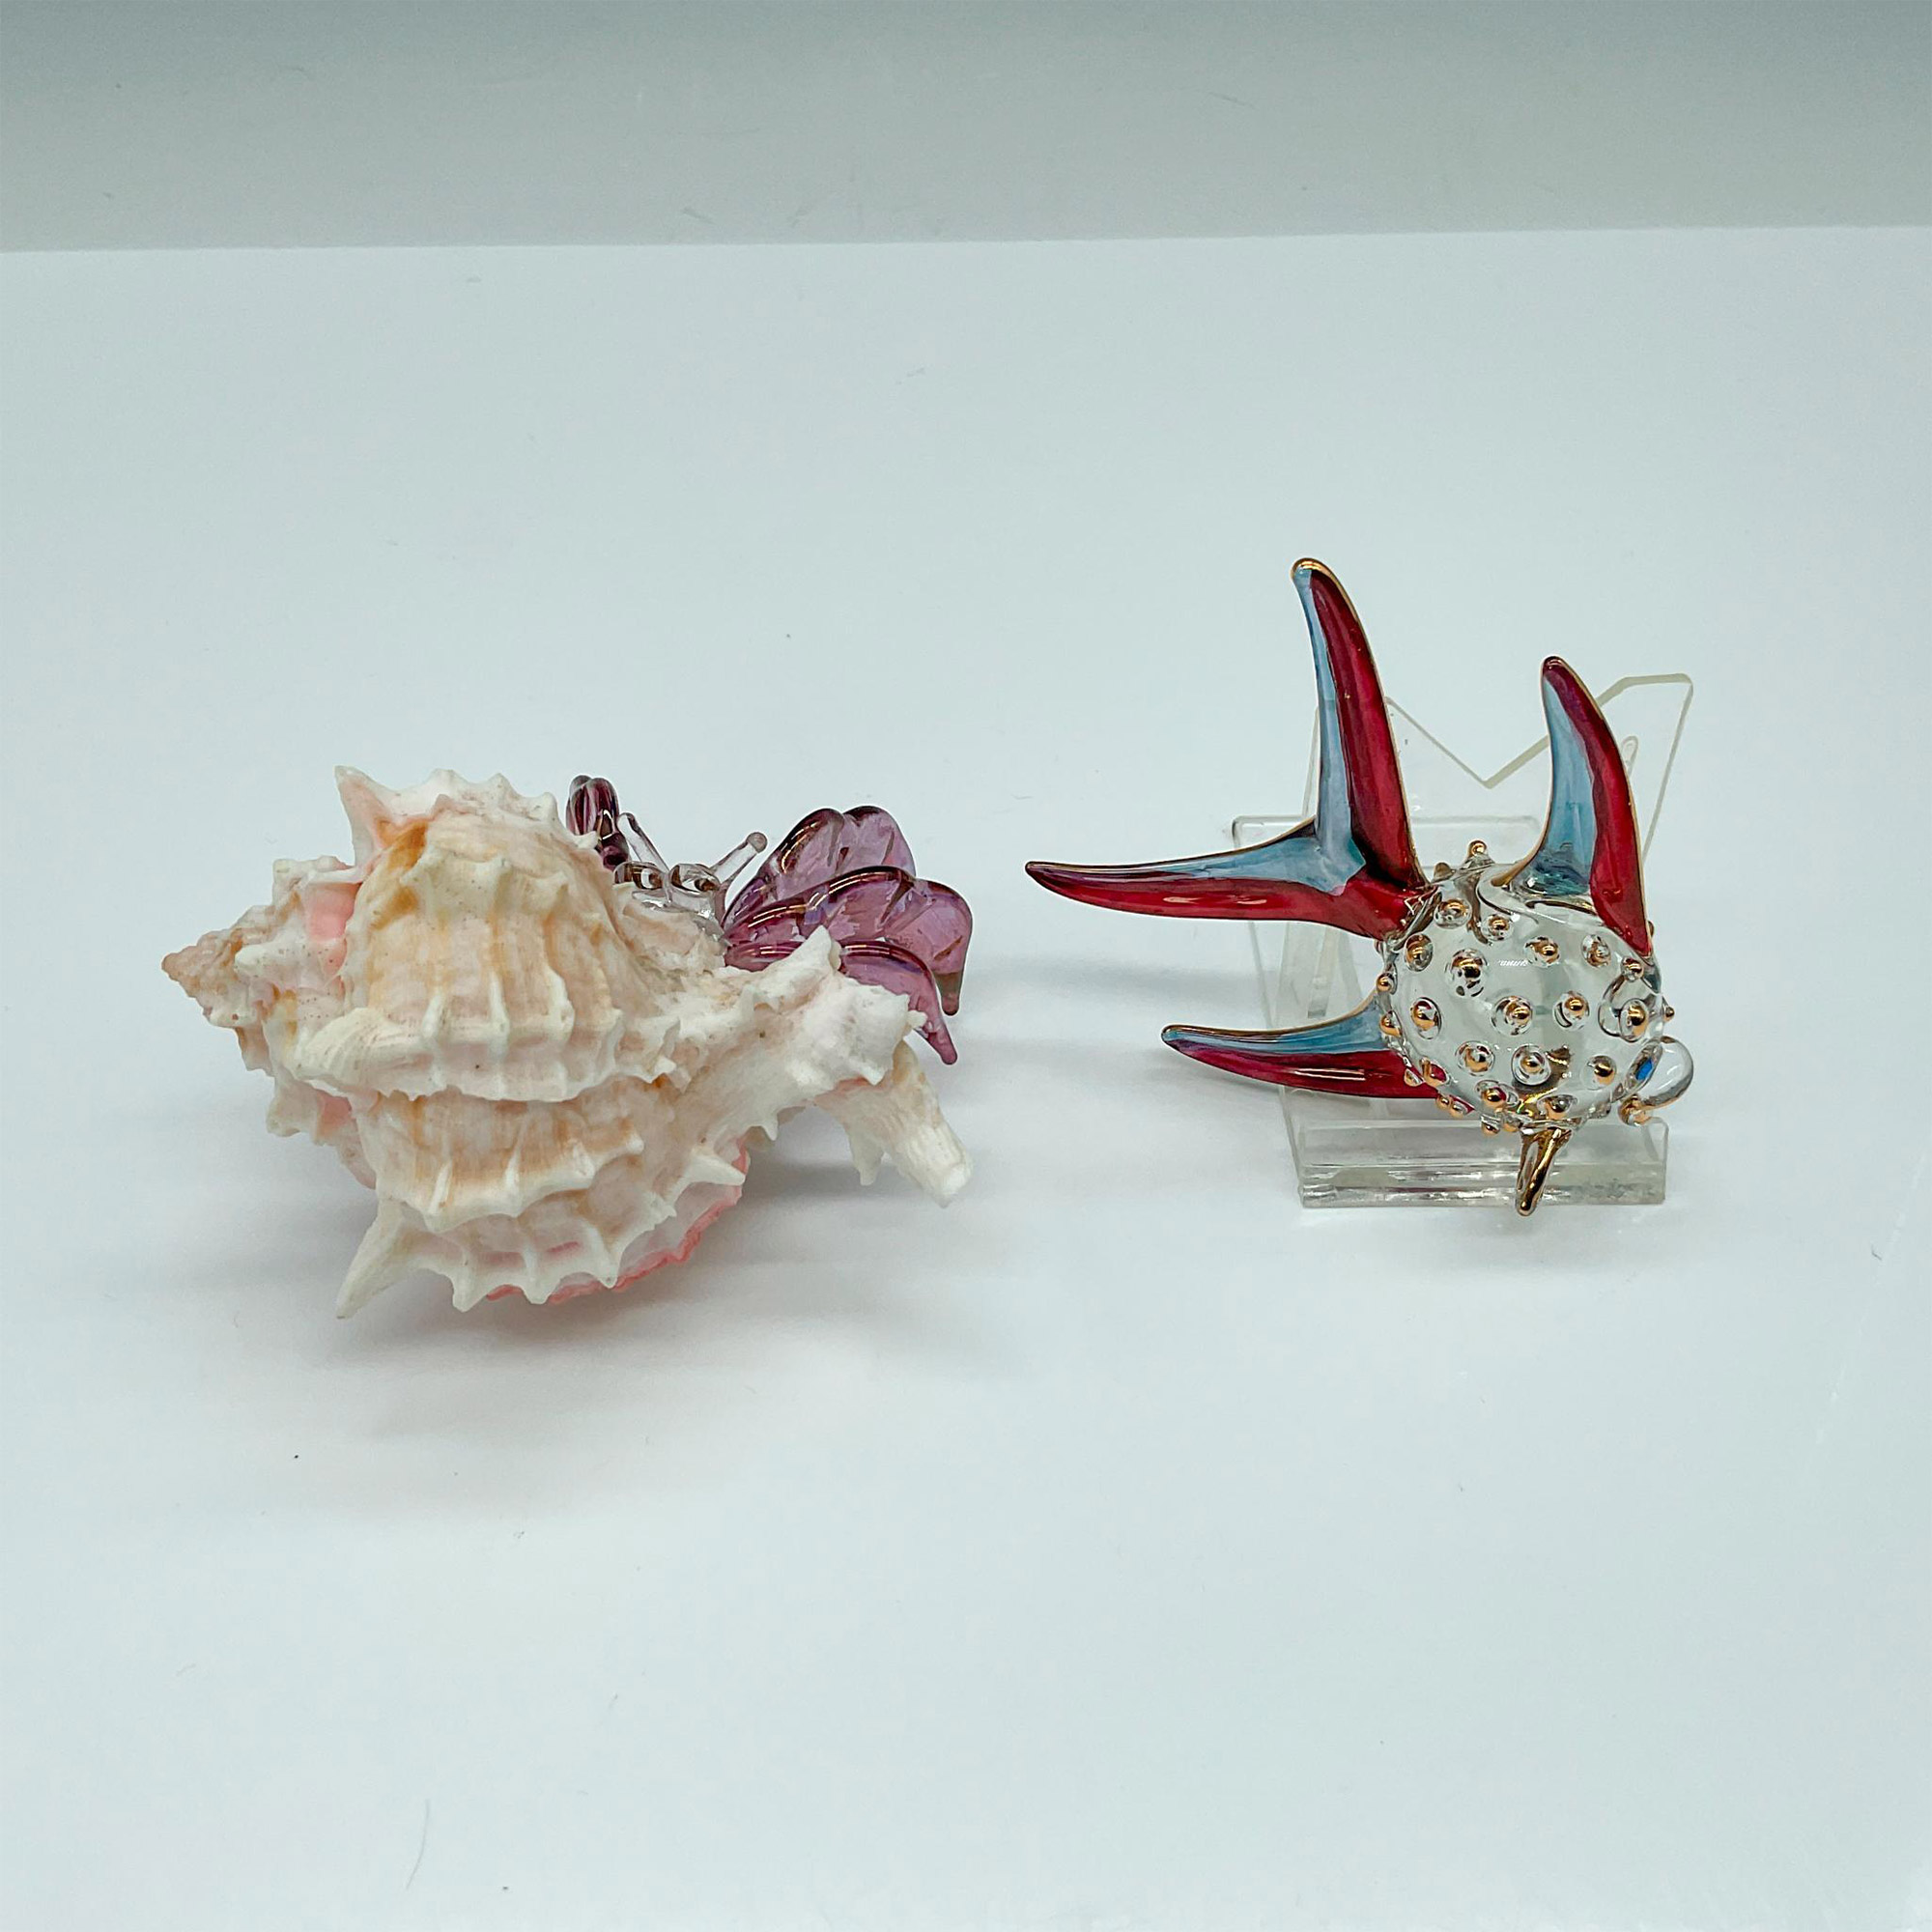 2pc Blown Art Glass with Natural Seashell Figurines - Image 2 of 3